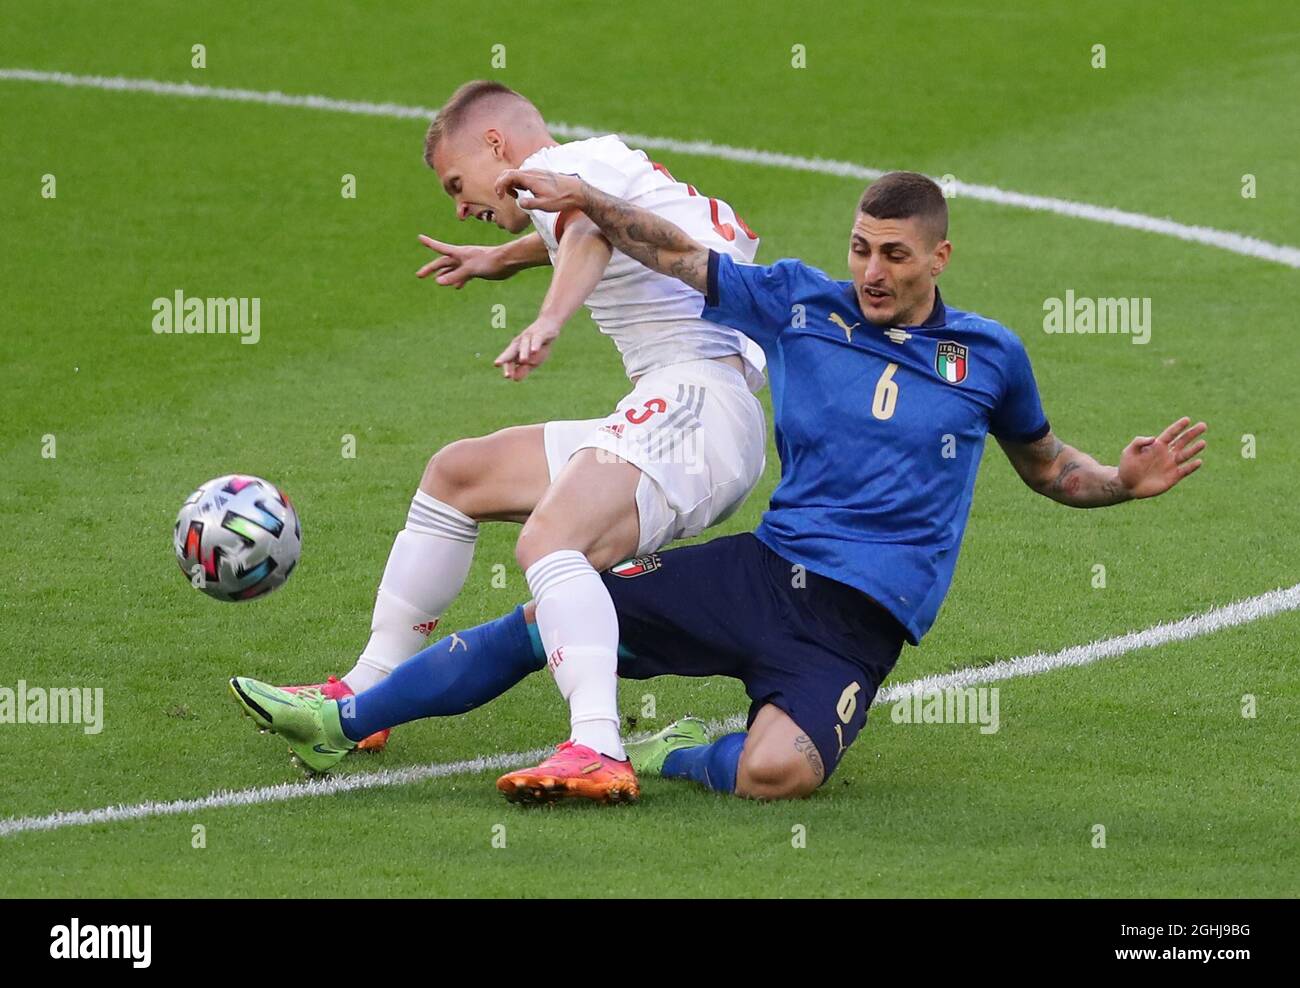 London, England, 6th July 2021. Dani Olmo of Spain tackled by Marco Verratti of Italy during the UEFA Euro 2020 match at Wembley Stadium, London. Picture credit should read: David Klein / Sportimage via PA Images Stock Photo